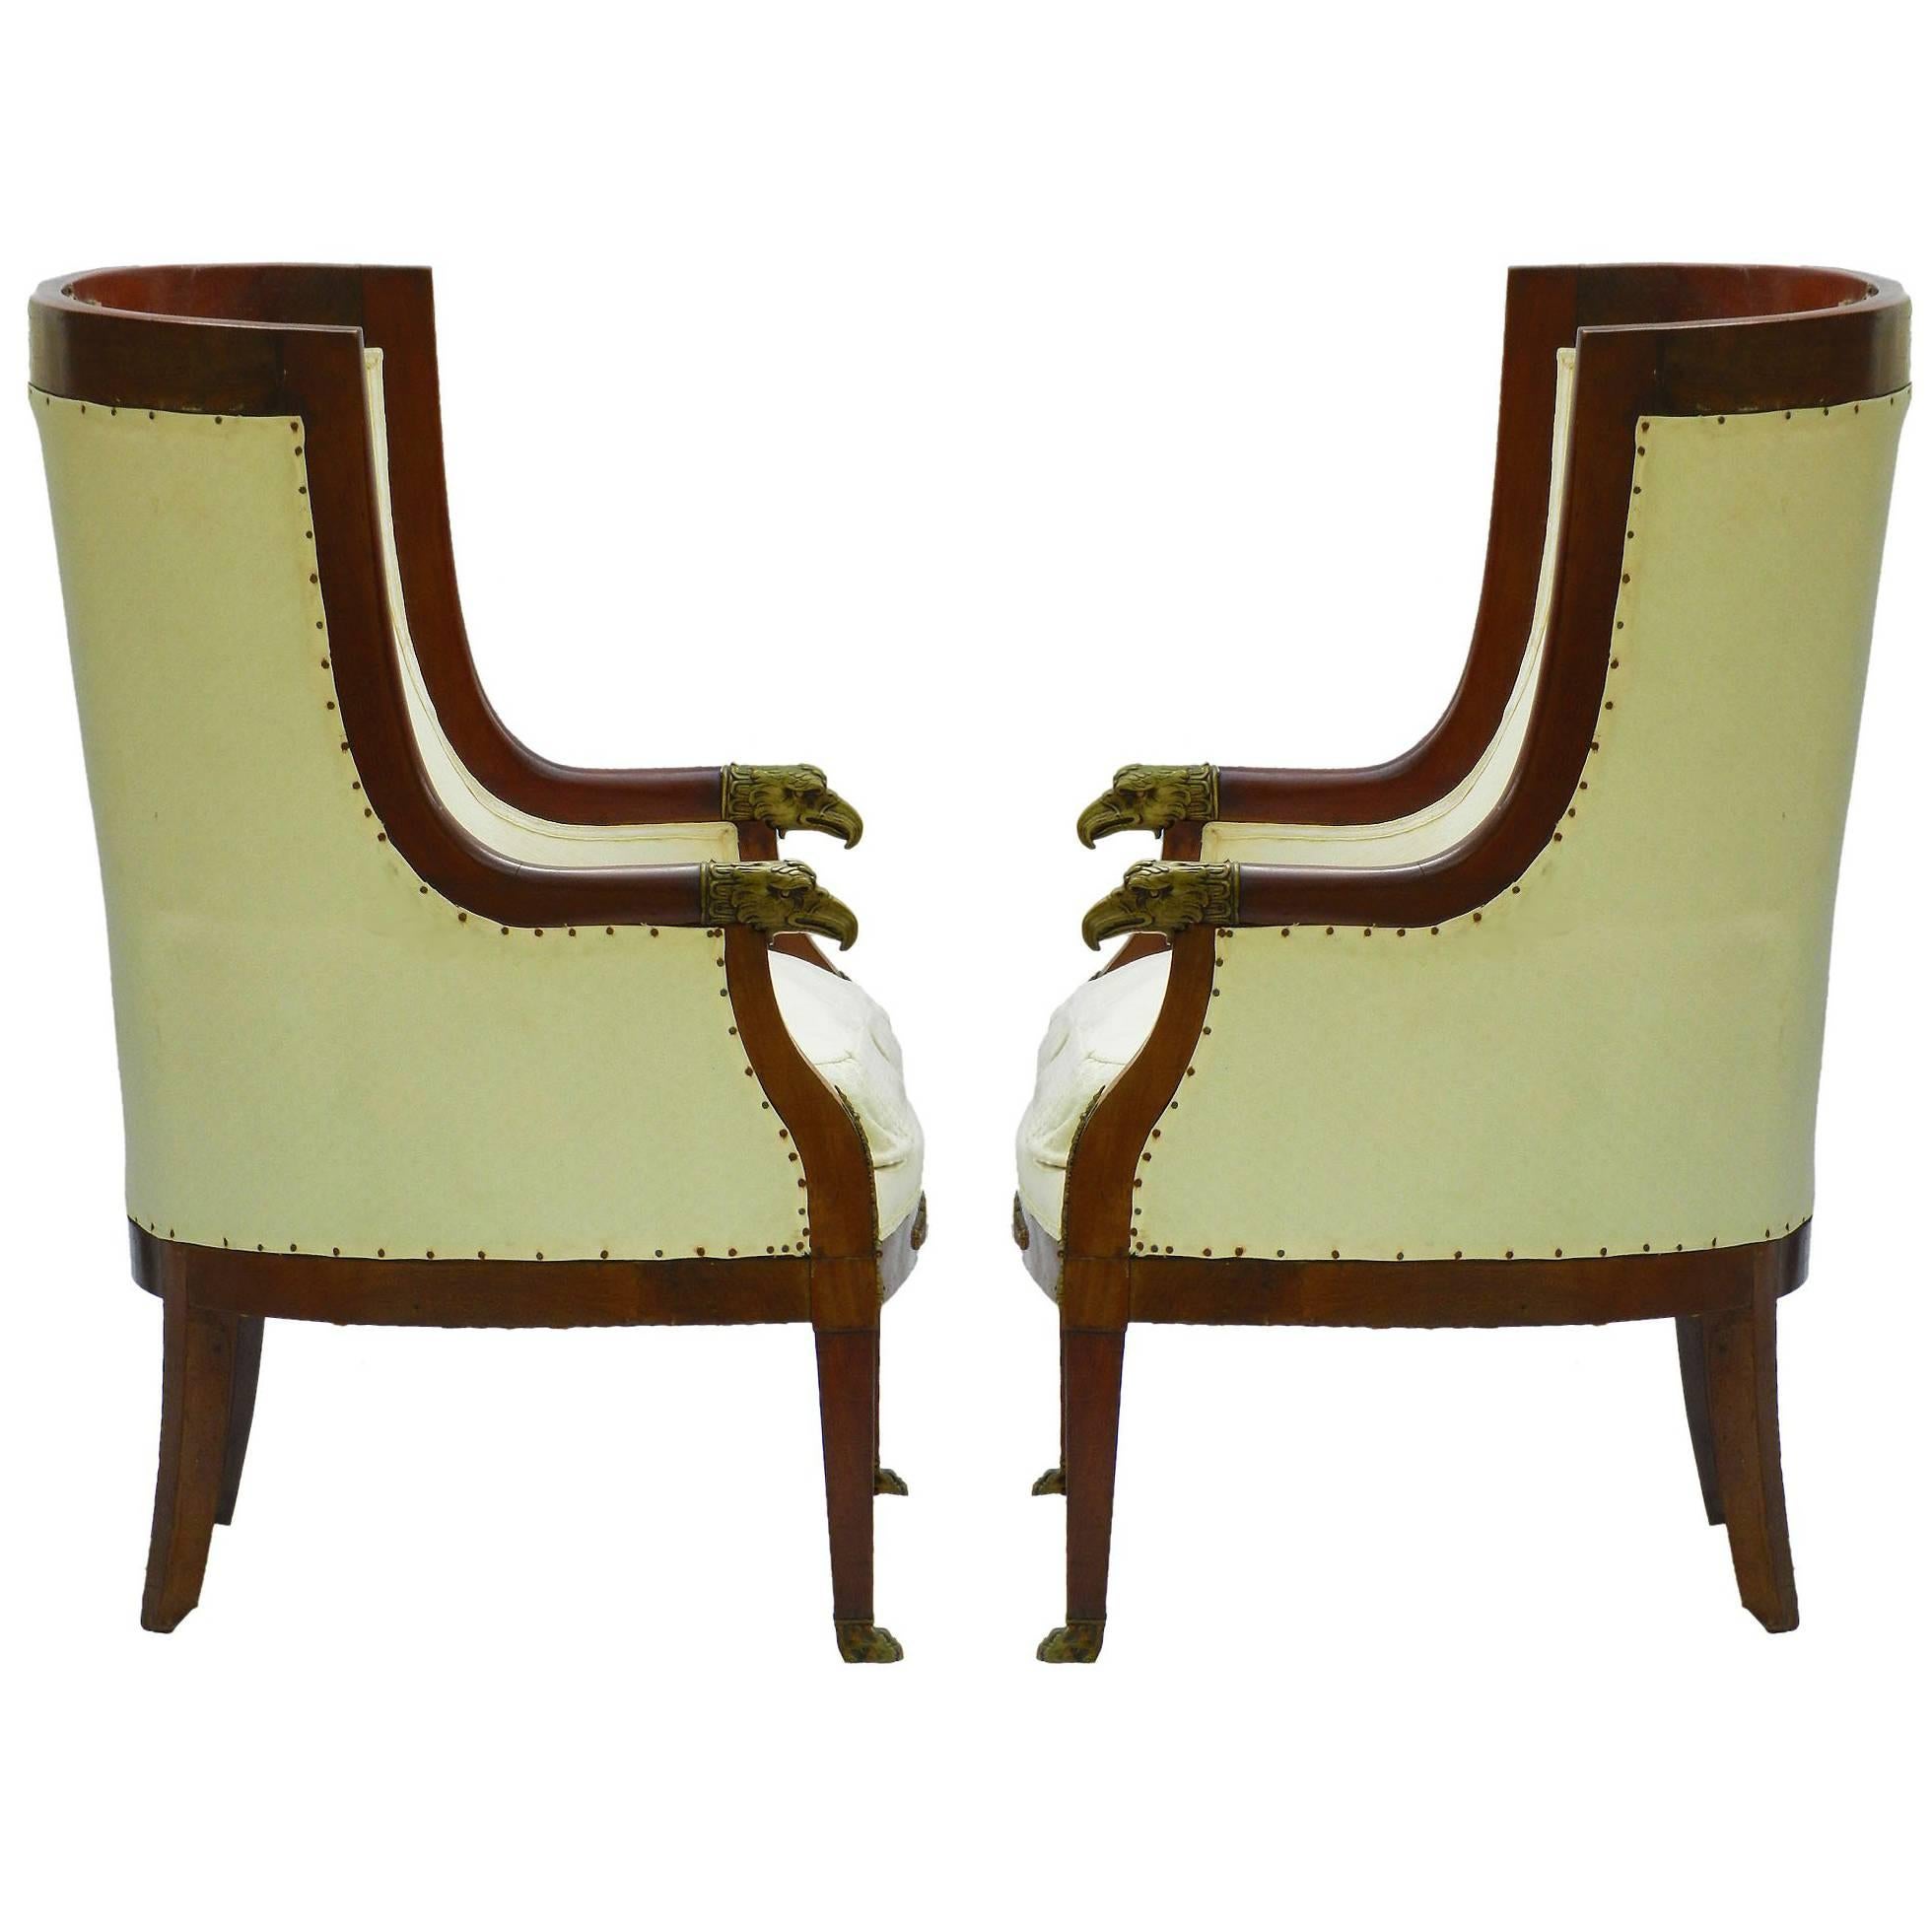 Pair of Bergere Armchairs French Empire Revival Barrel Chairs